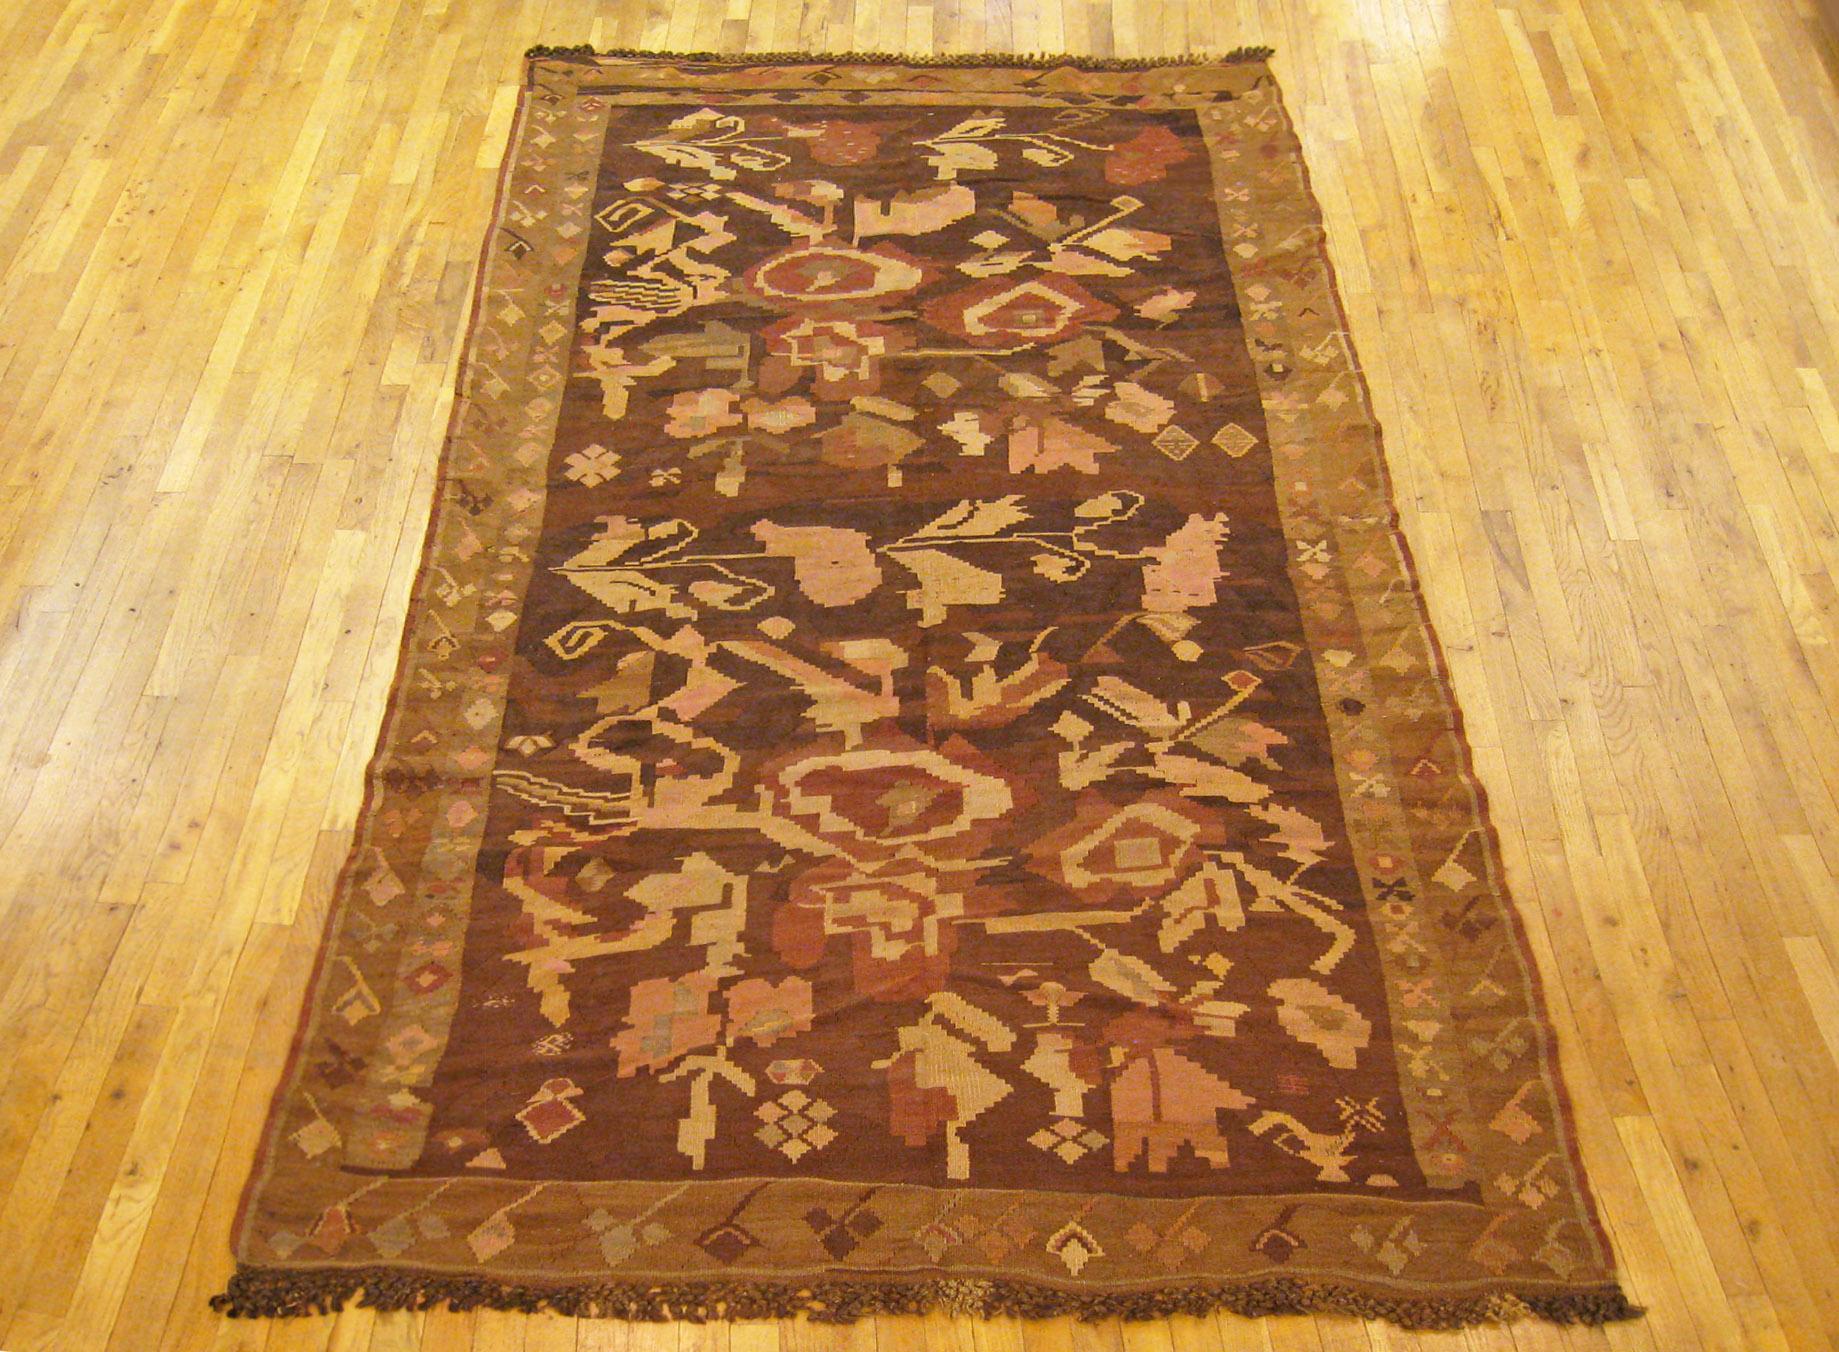 A vintage Bessarabian Kilim oriental rug in kaleghi (gallery) size, size 11'0 x 5'6, circa 1930. This handsome handmade flat-woven carpet has no upward pile, and features a stylized large scale floral design in the brown central field. The field is